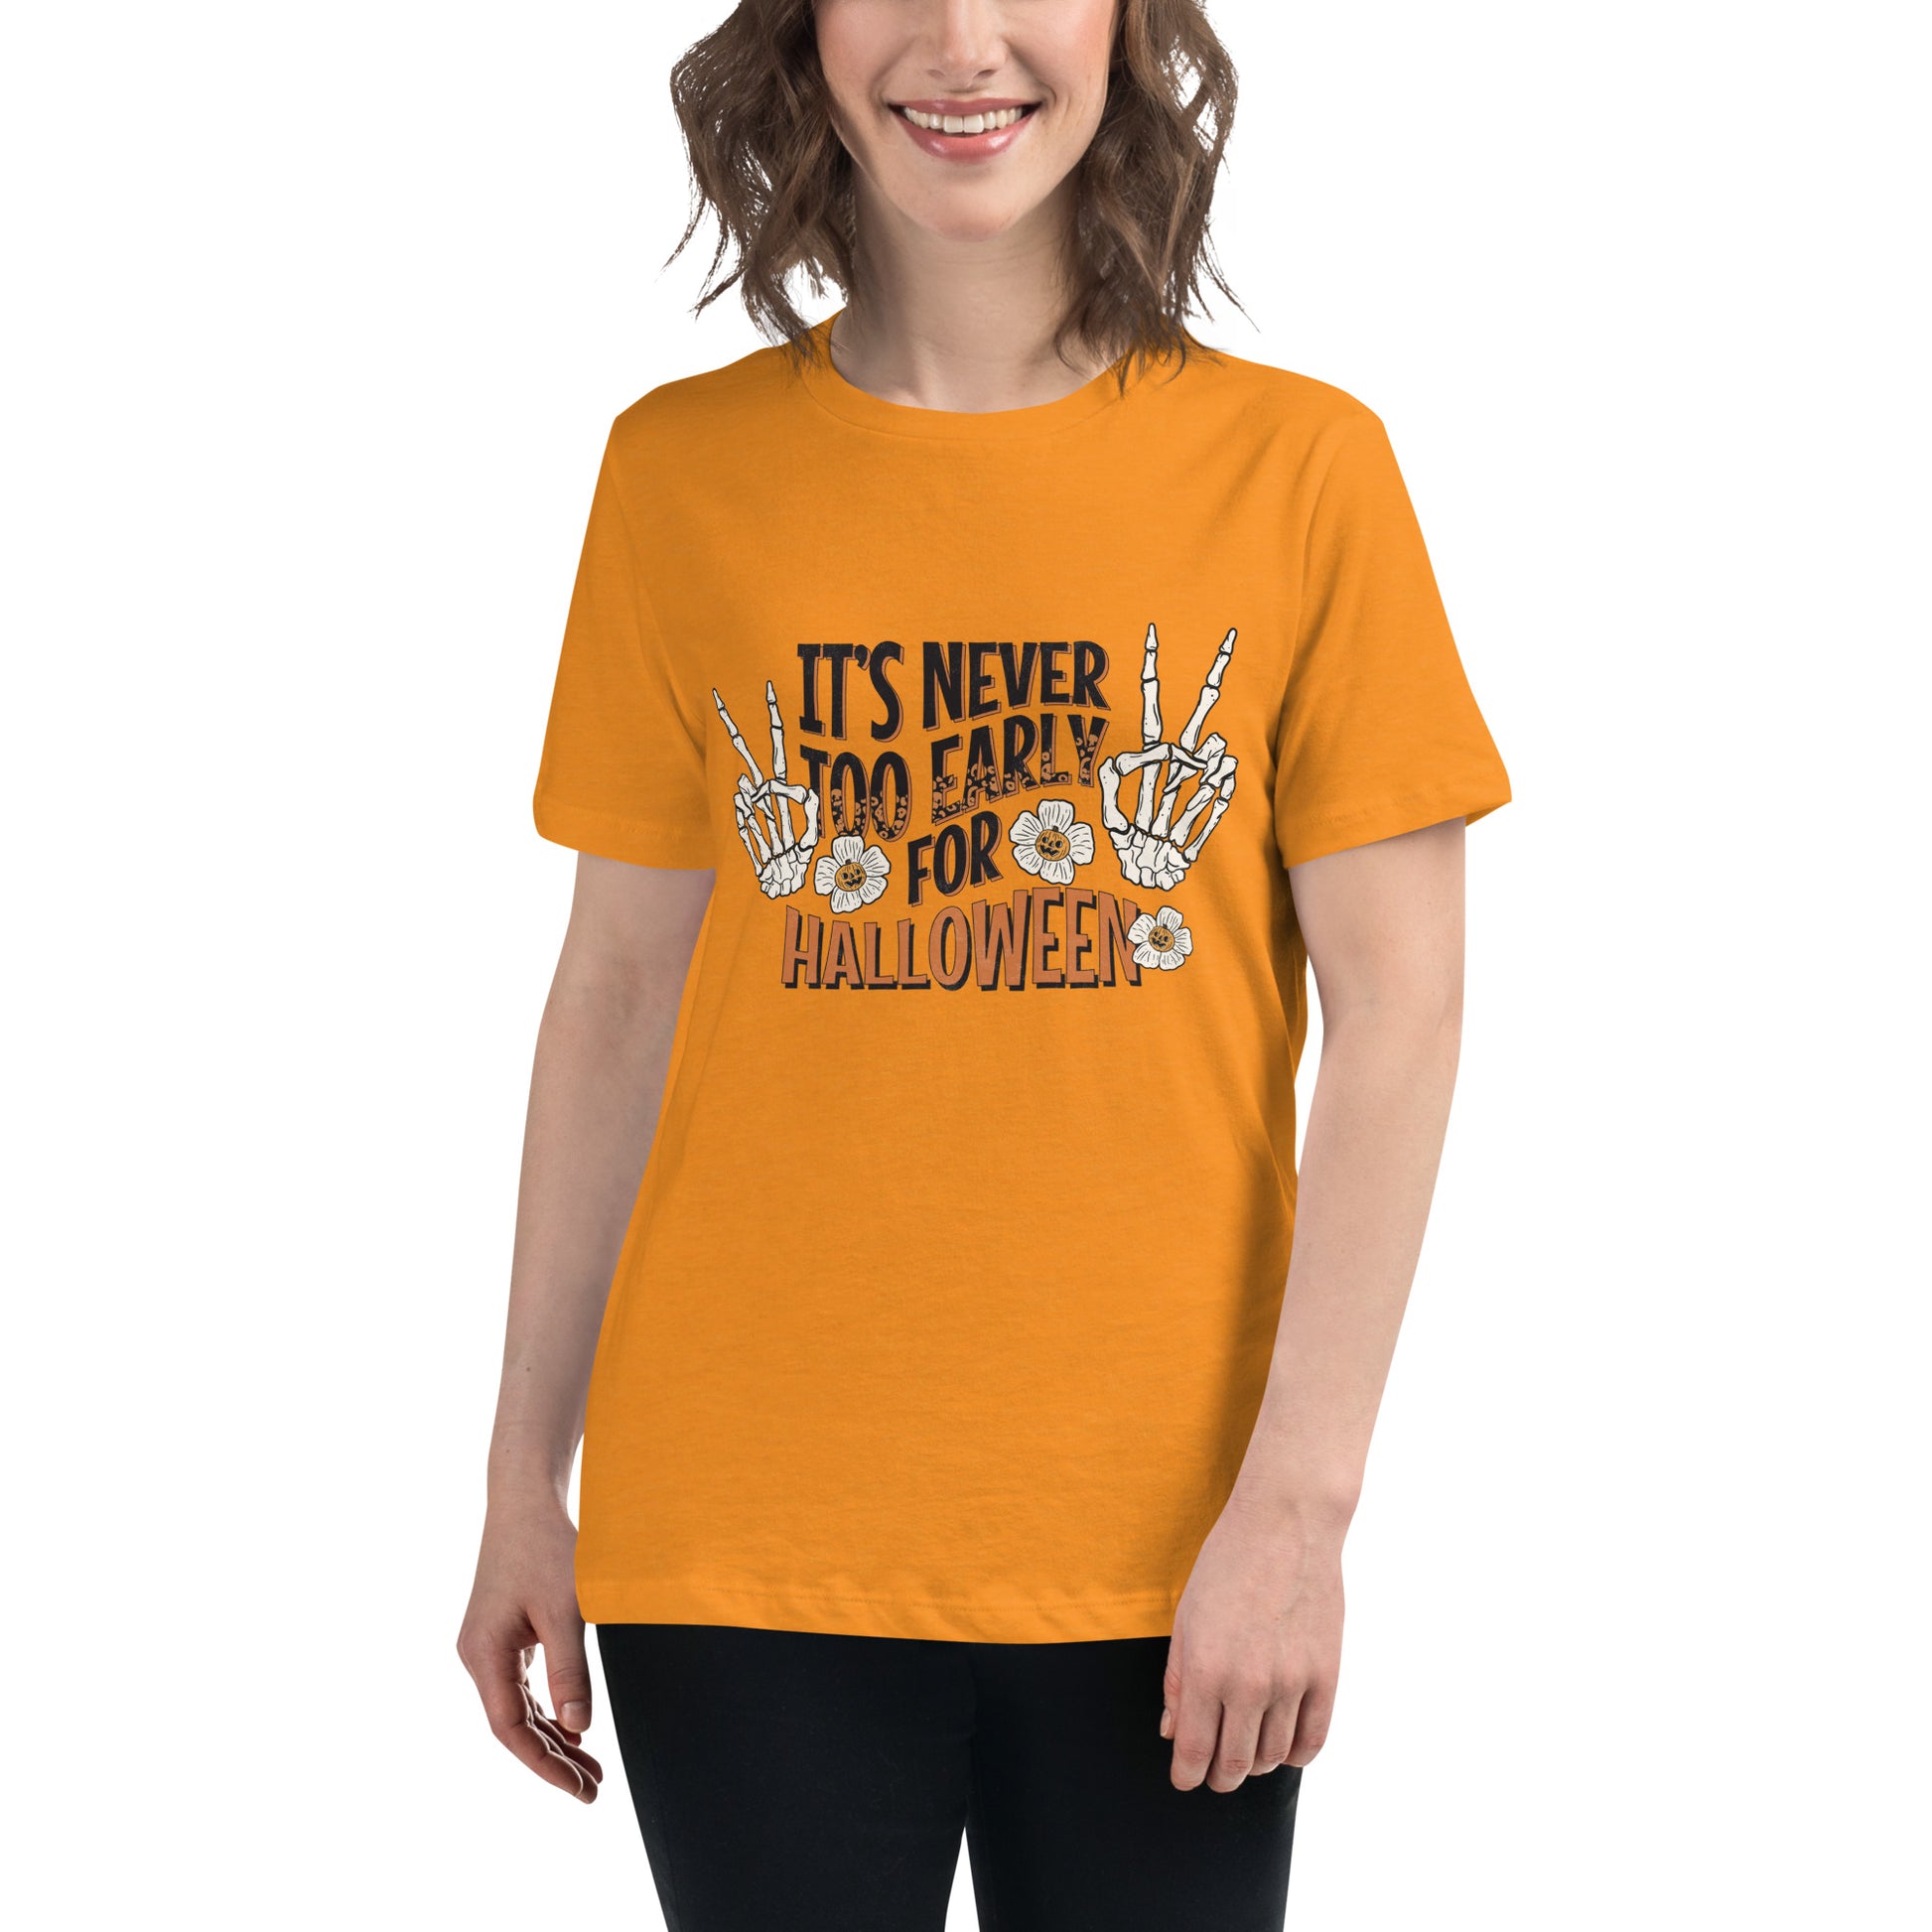 It's Never Too Early for Halloween Women's Relaxed T-Shirt Tee Tshirt